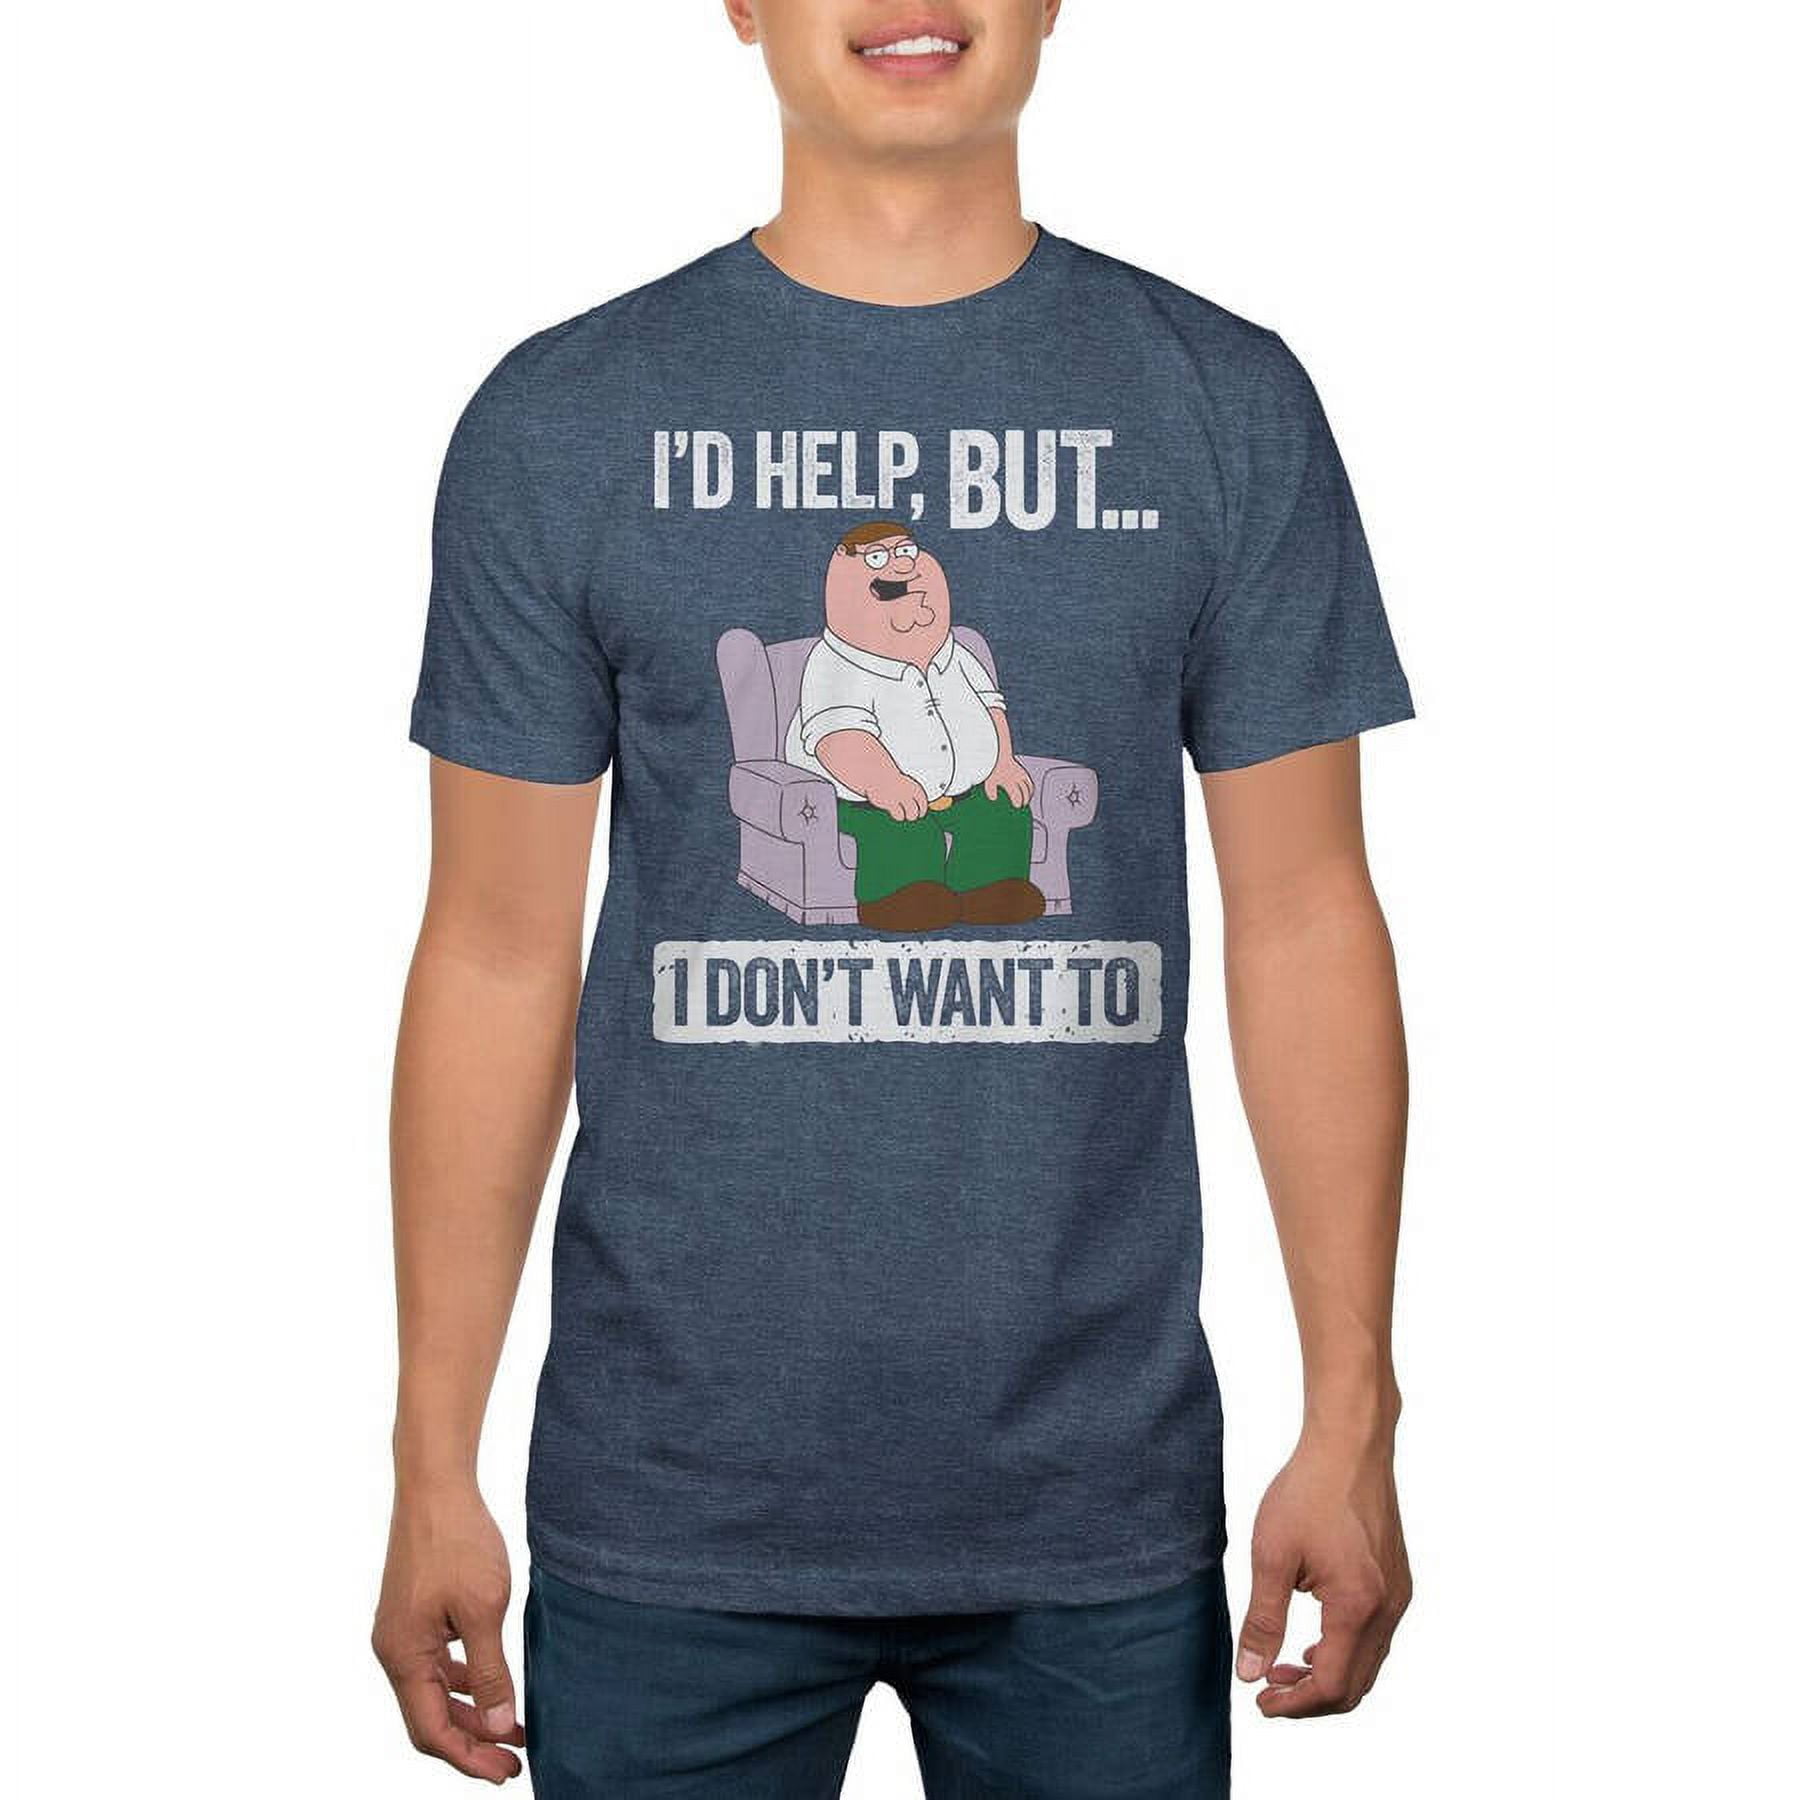 Graphic　Big　Help　Men'　But　Family　I　Guy　I'd　Don't　Want　To　Tee